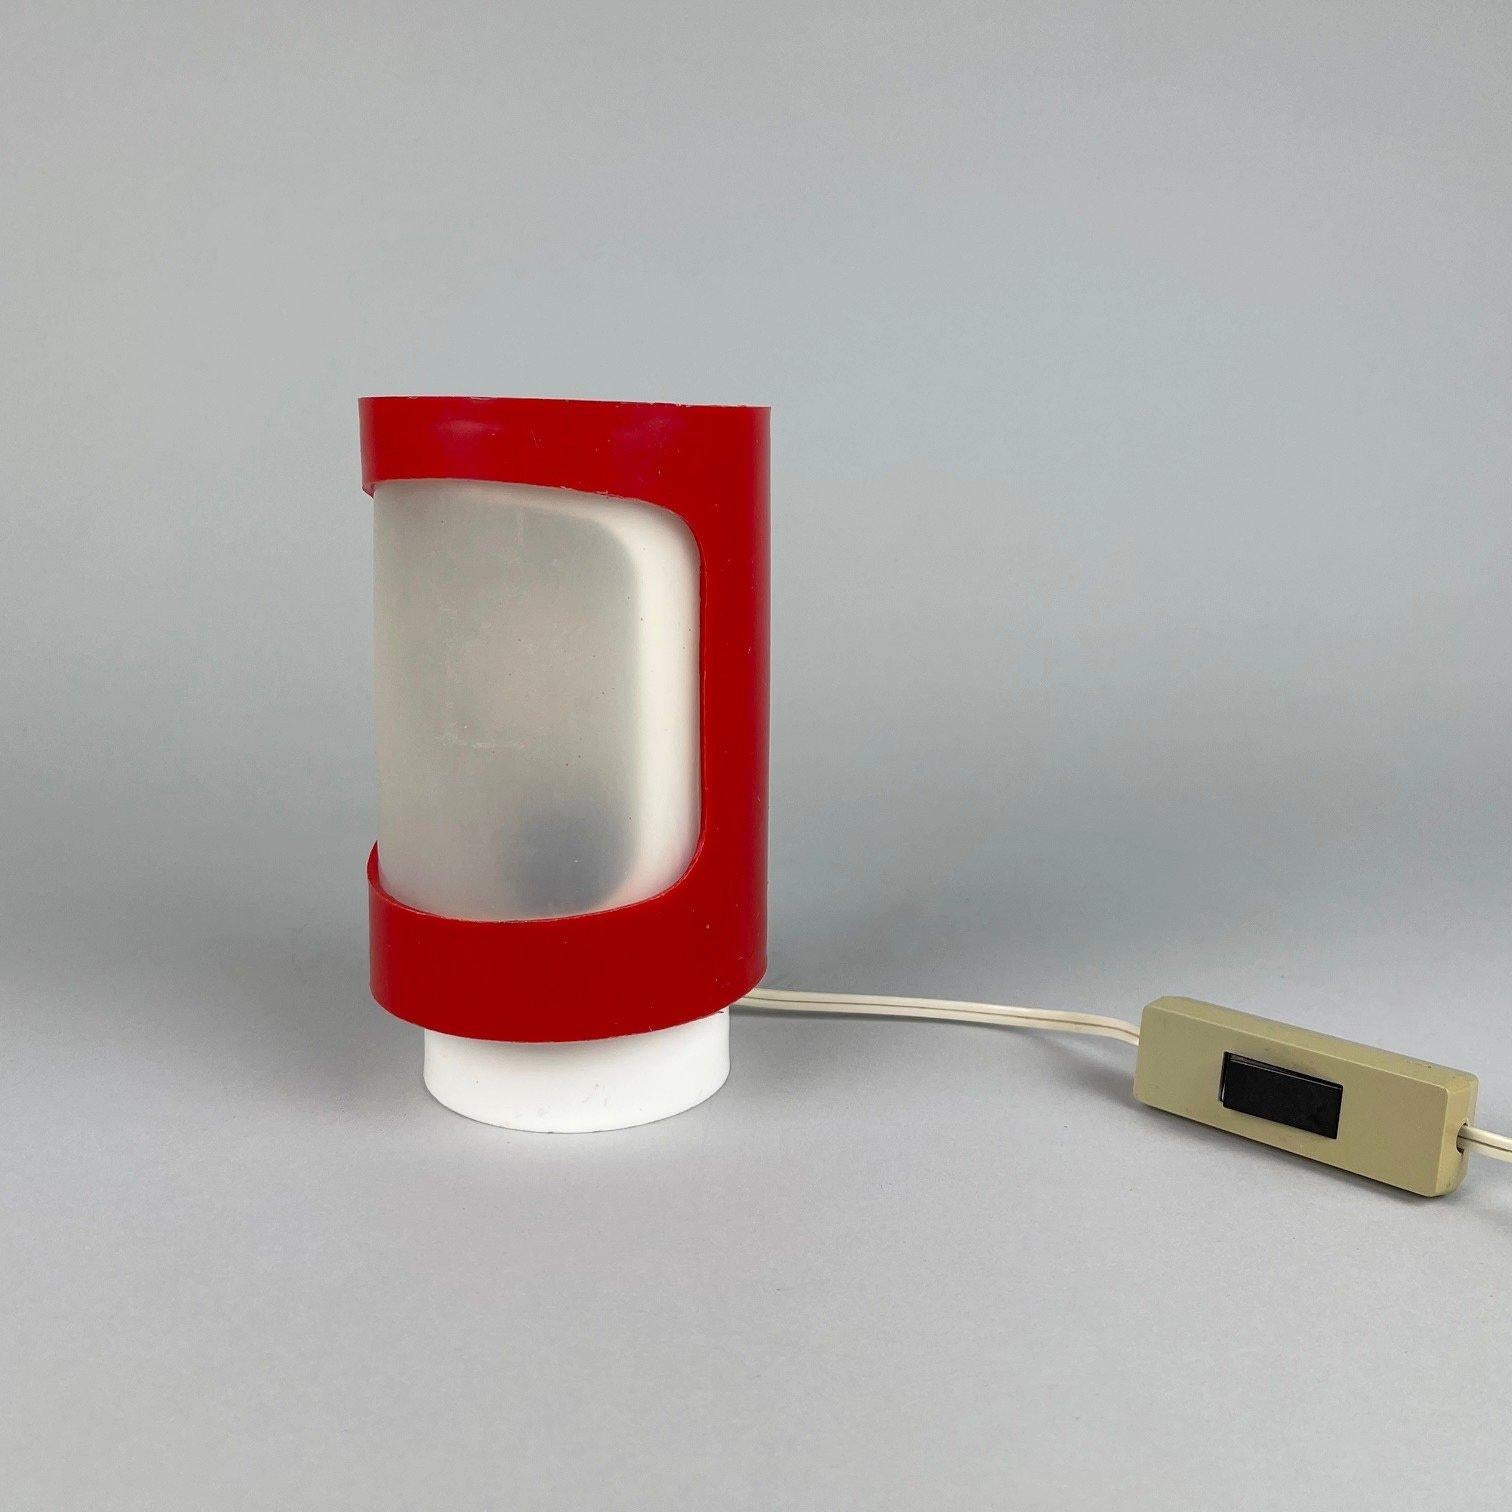 Vintage table lamp made of plastic. The red part can be rotated to regulate the strength of the light.